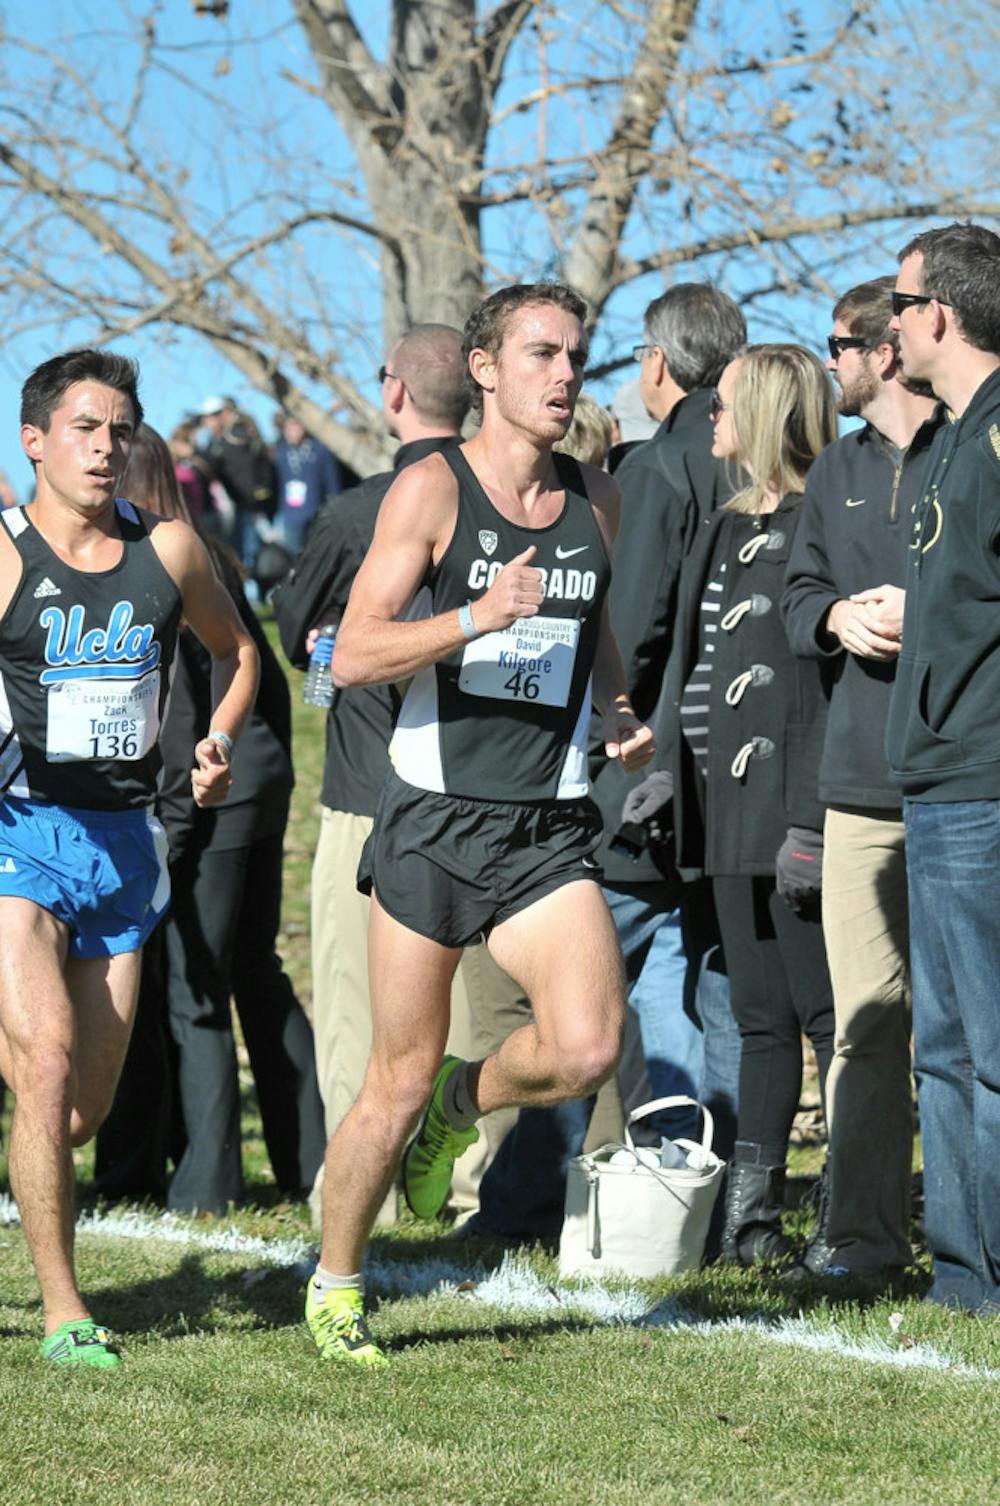 <p>David Kilgore races in the 2013 Pac-12 Cross Country Cahmpionships in Louisville, Colo.</p>